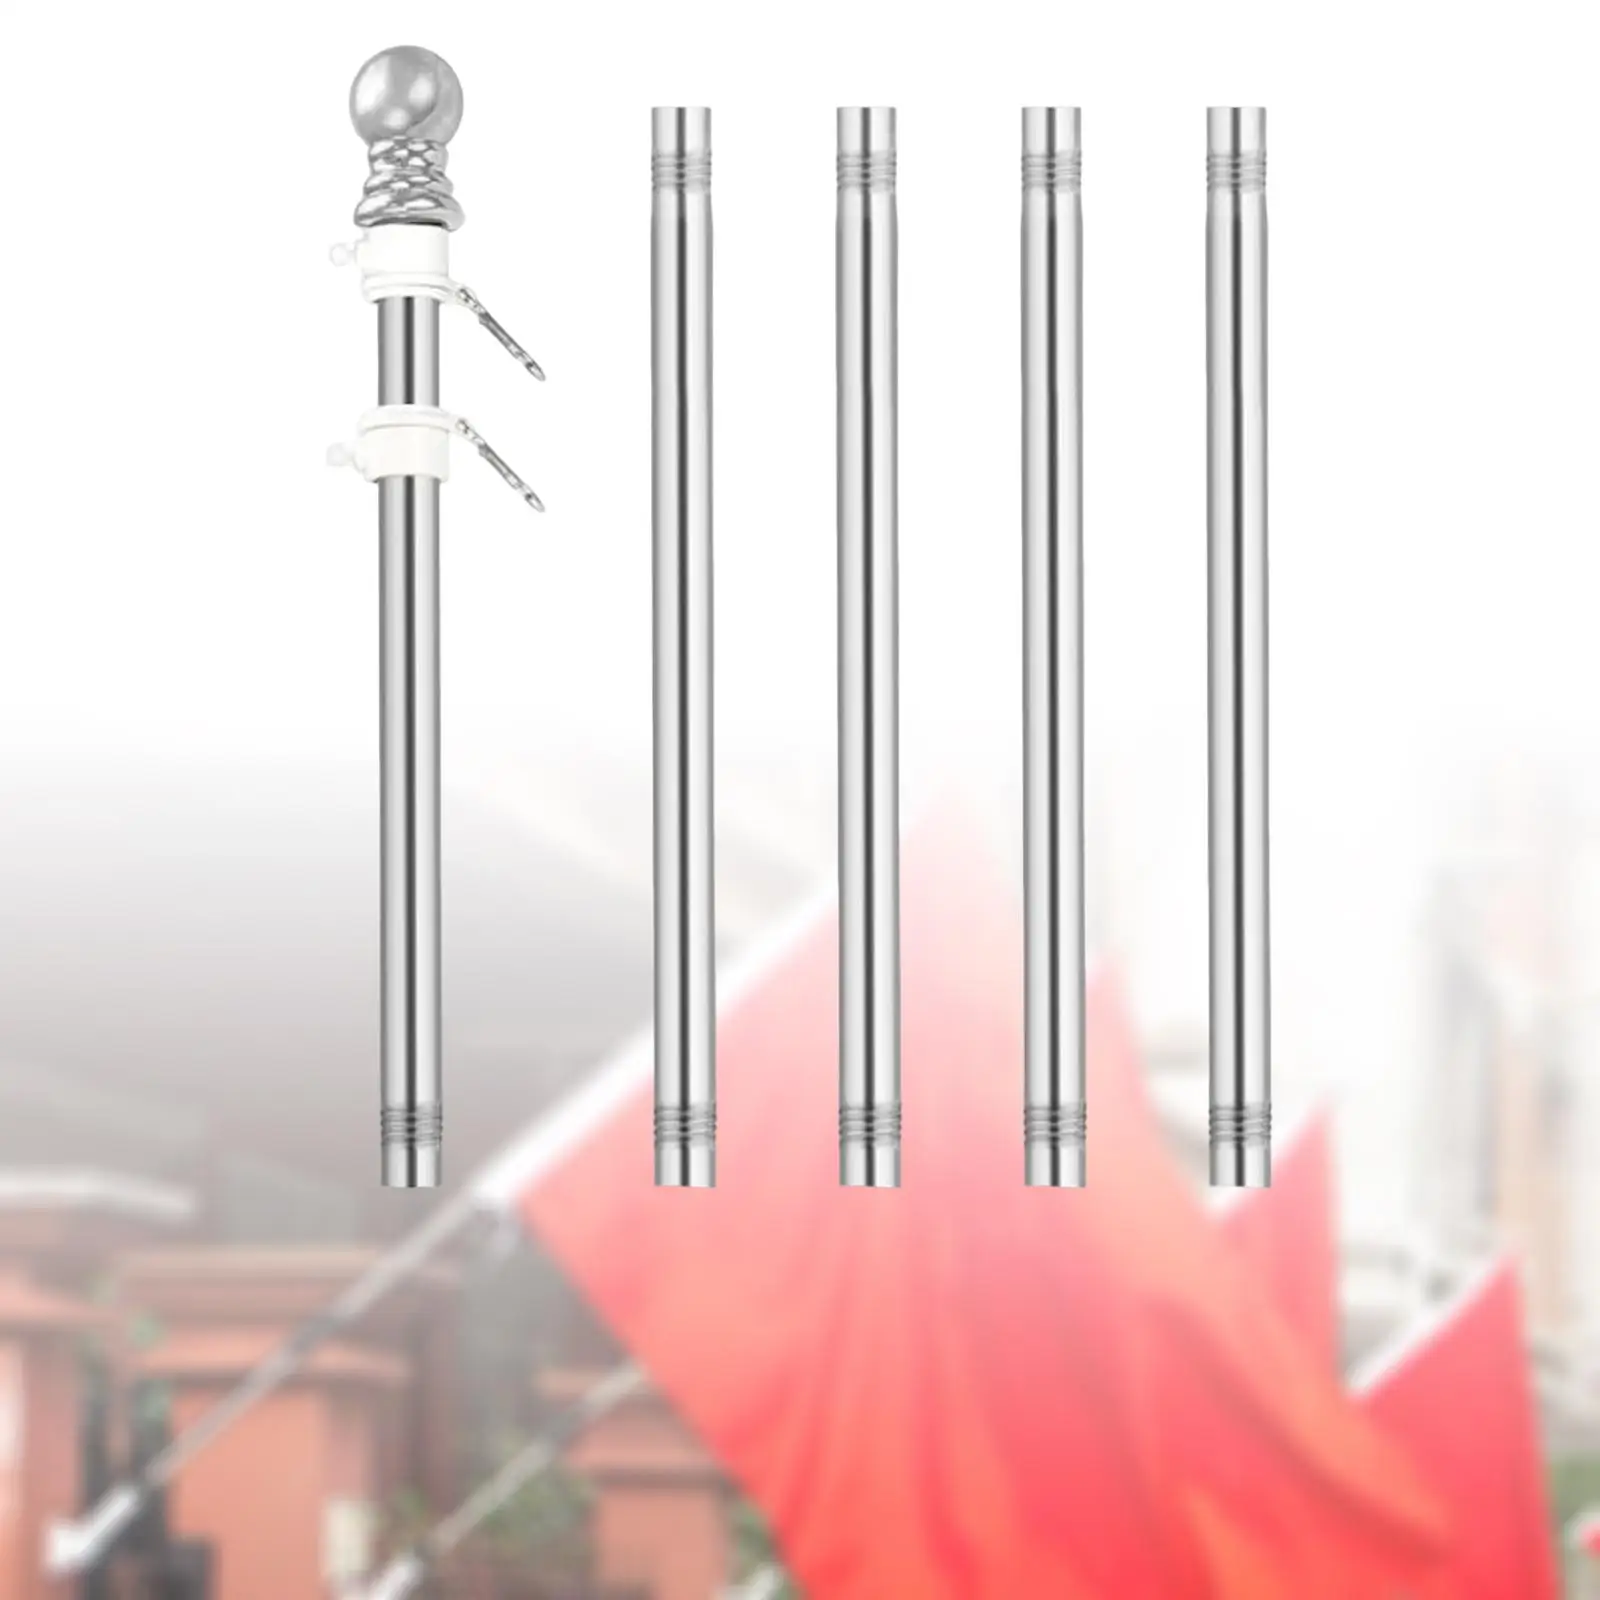 5x Stainless Steel Flag Flag Pole Guide Banner Five Sections Rod Garden Flag Pole Outdoor Residential House Porch